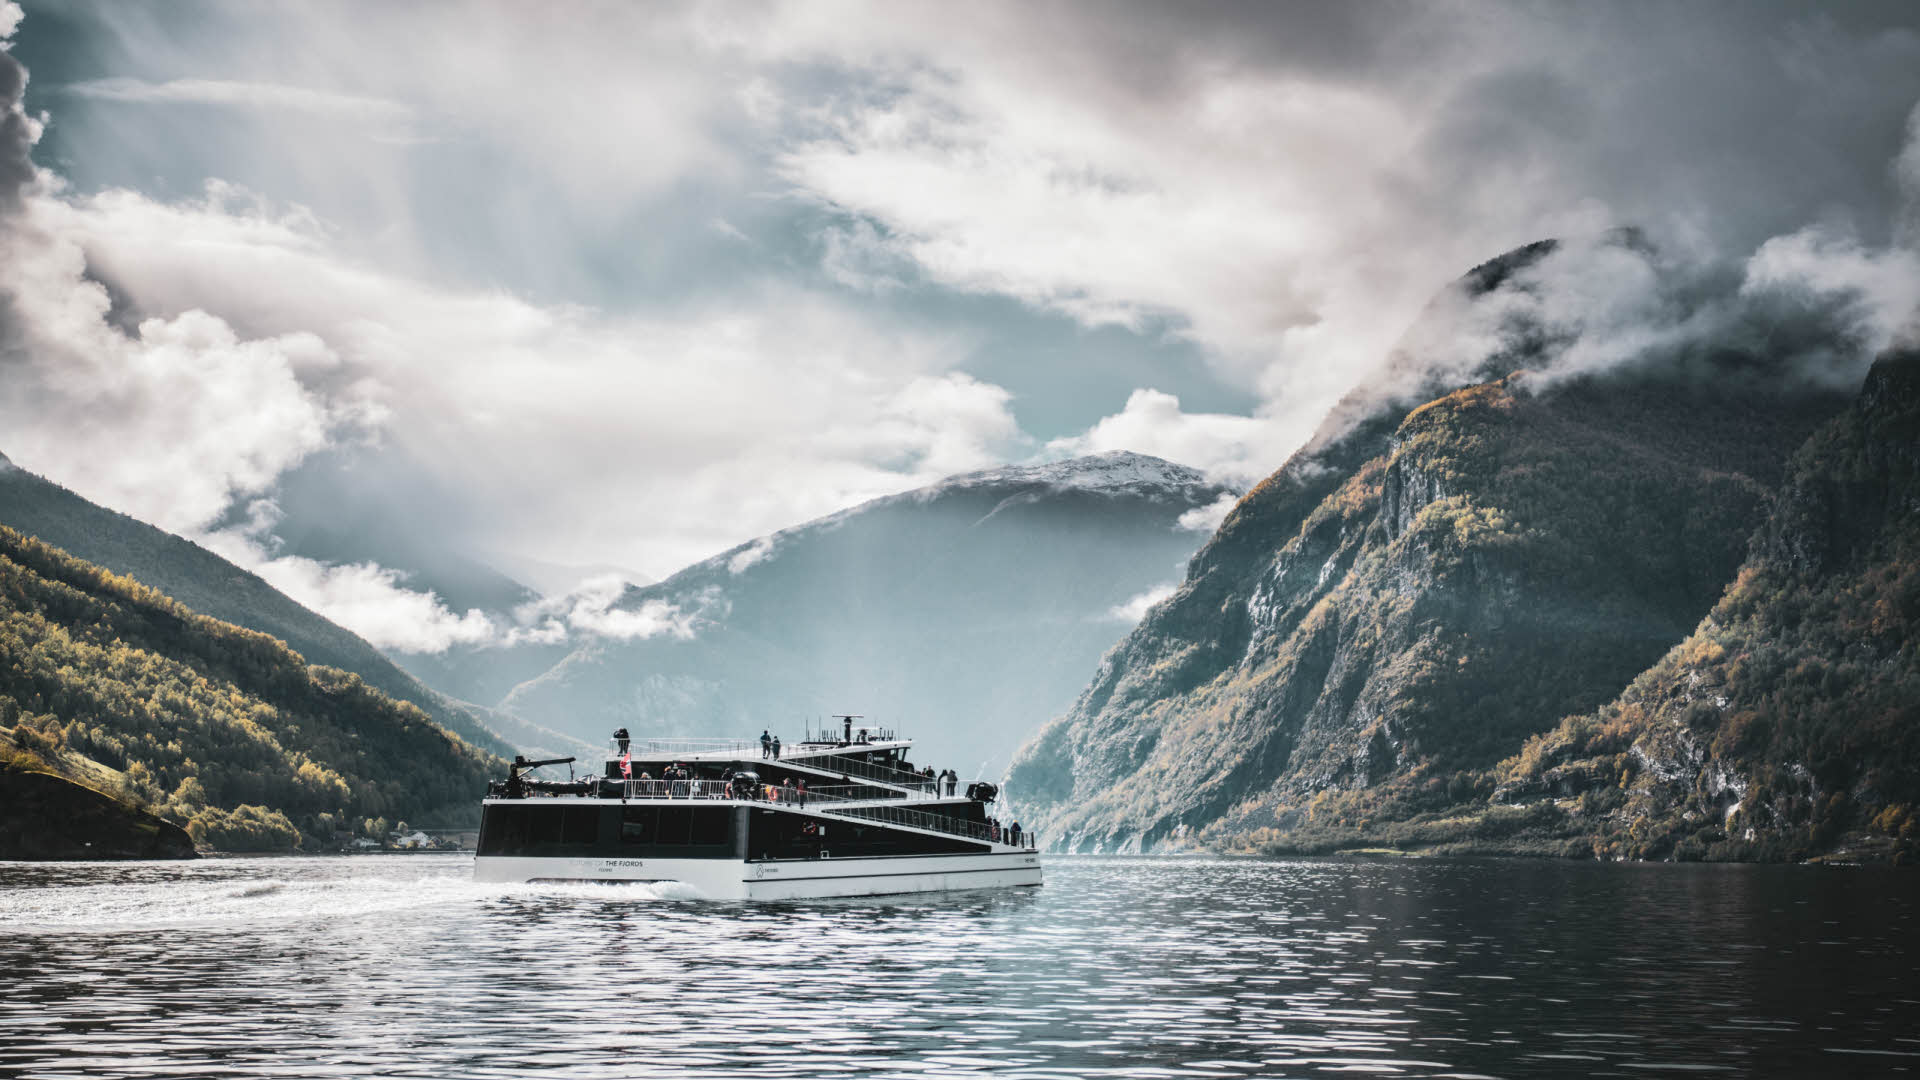 Future of The Fjords sailing on the Aurlandsfjord in cloudy weather